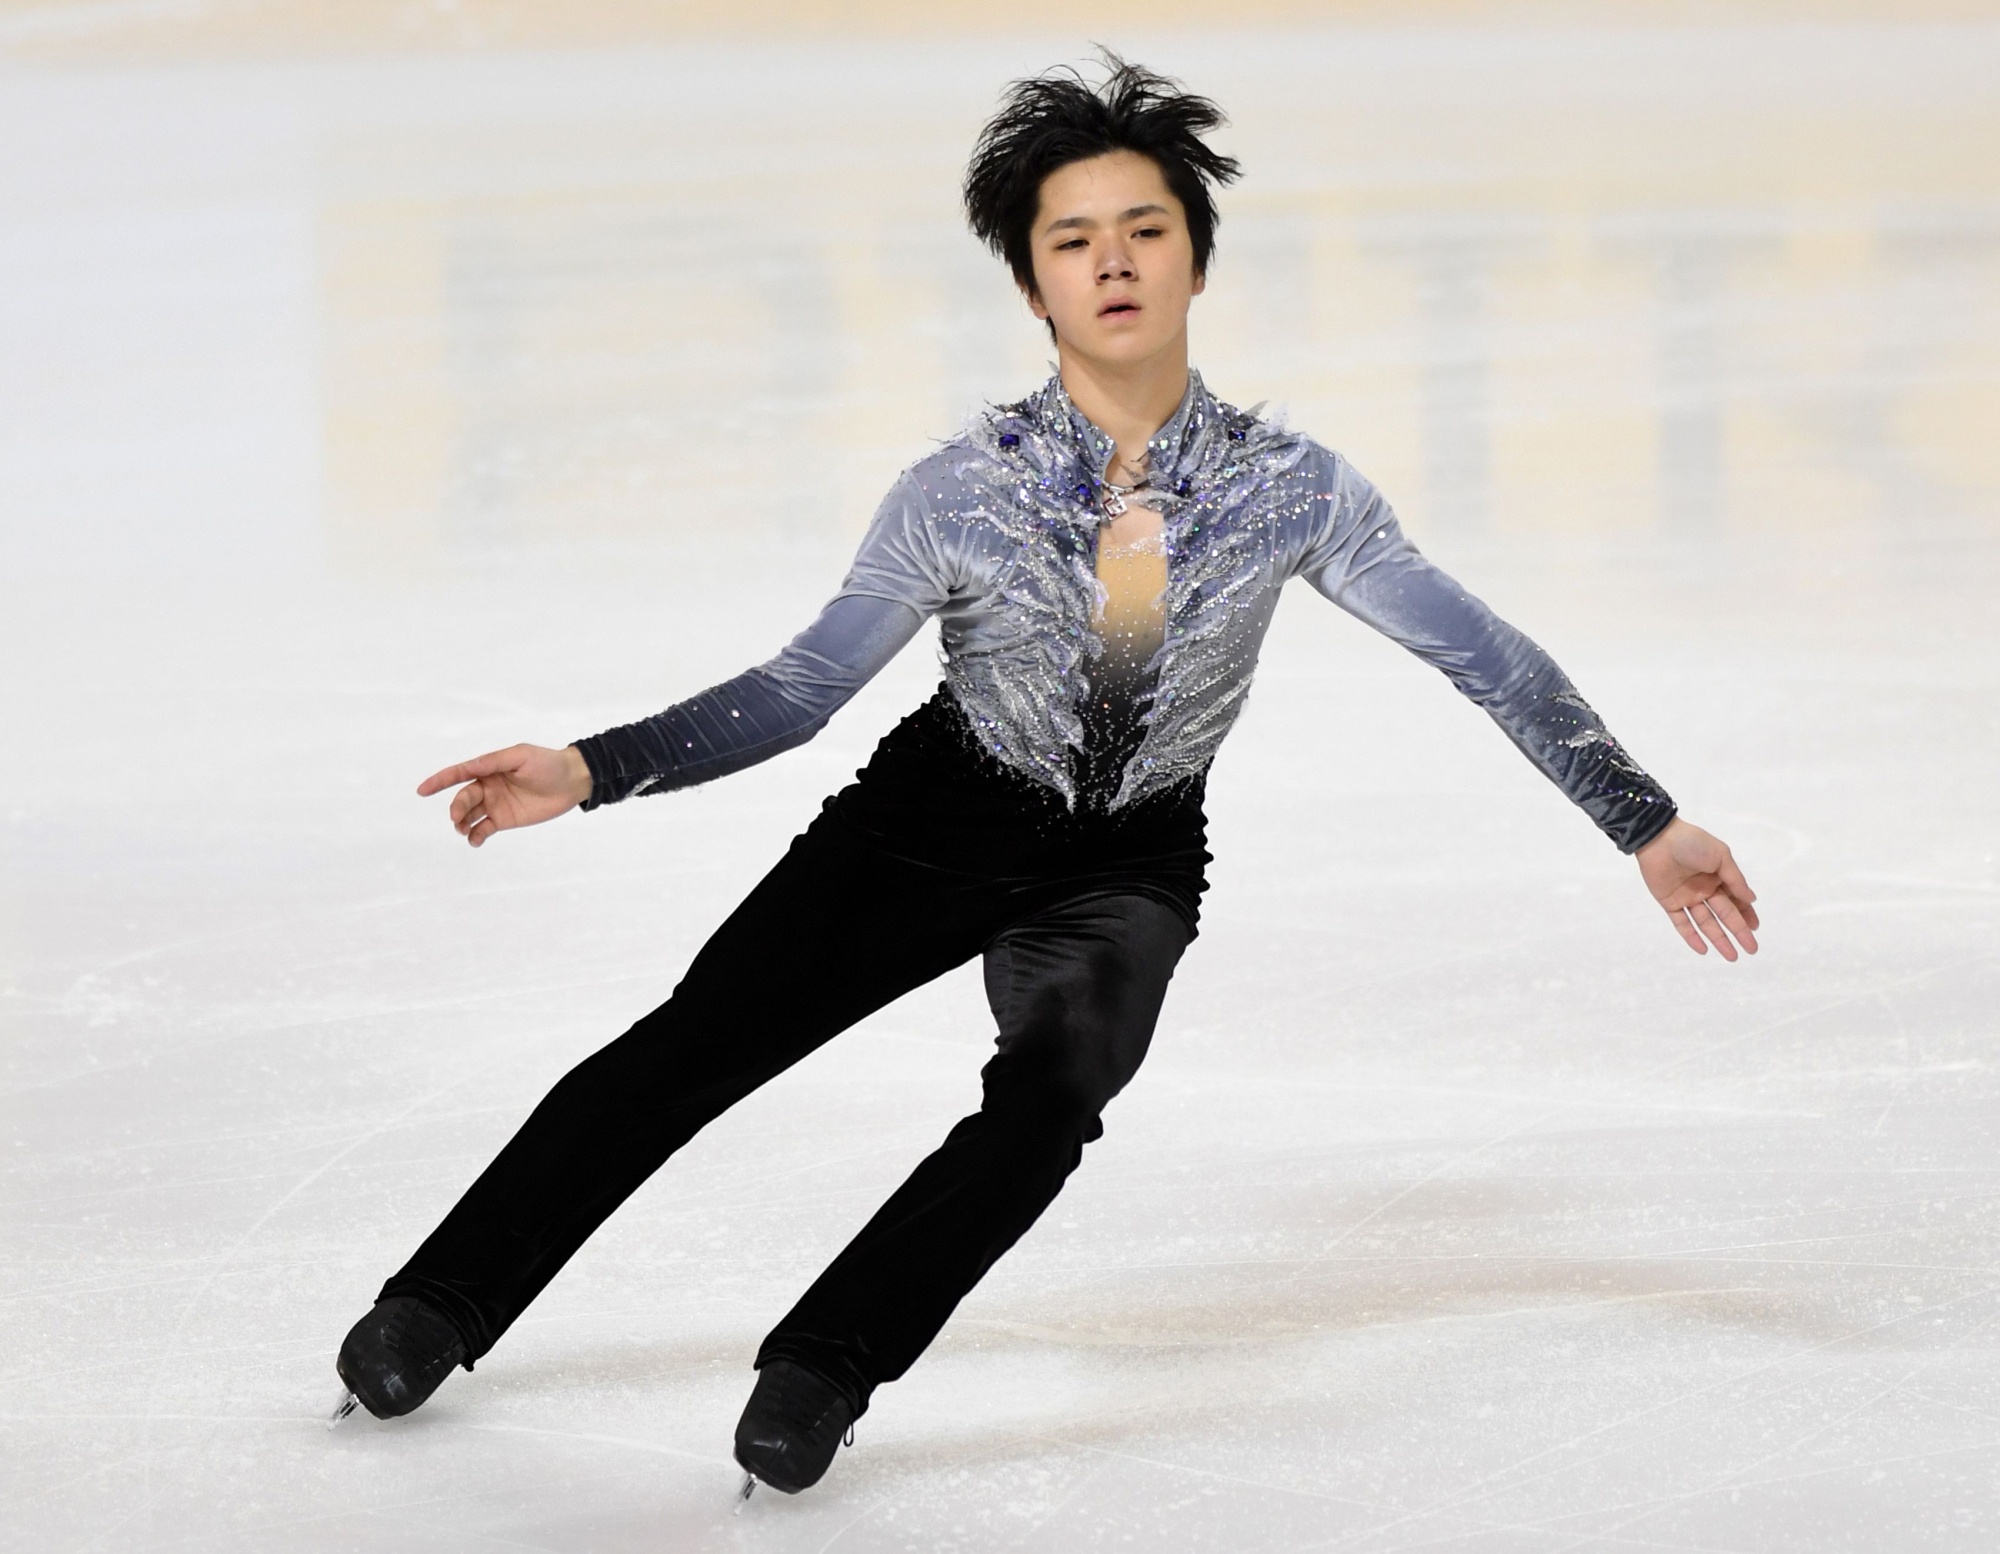 Shoma Uno in second place after short program at Internationaux de